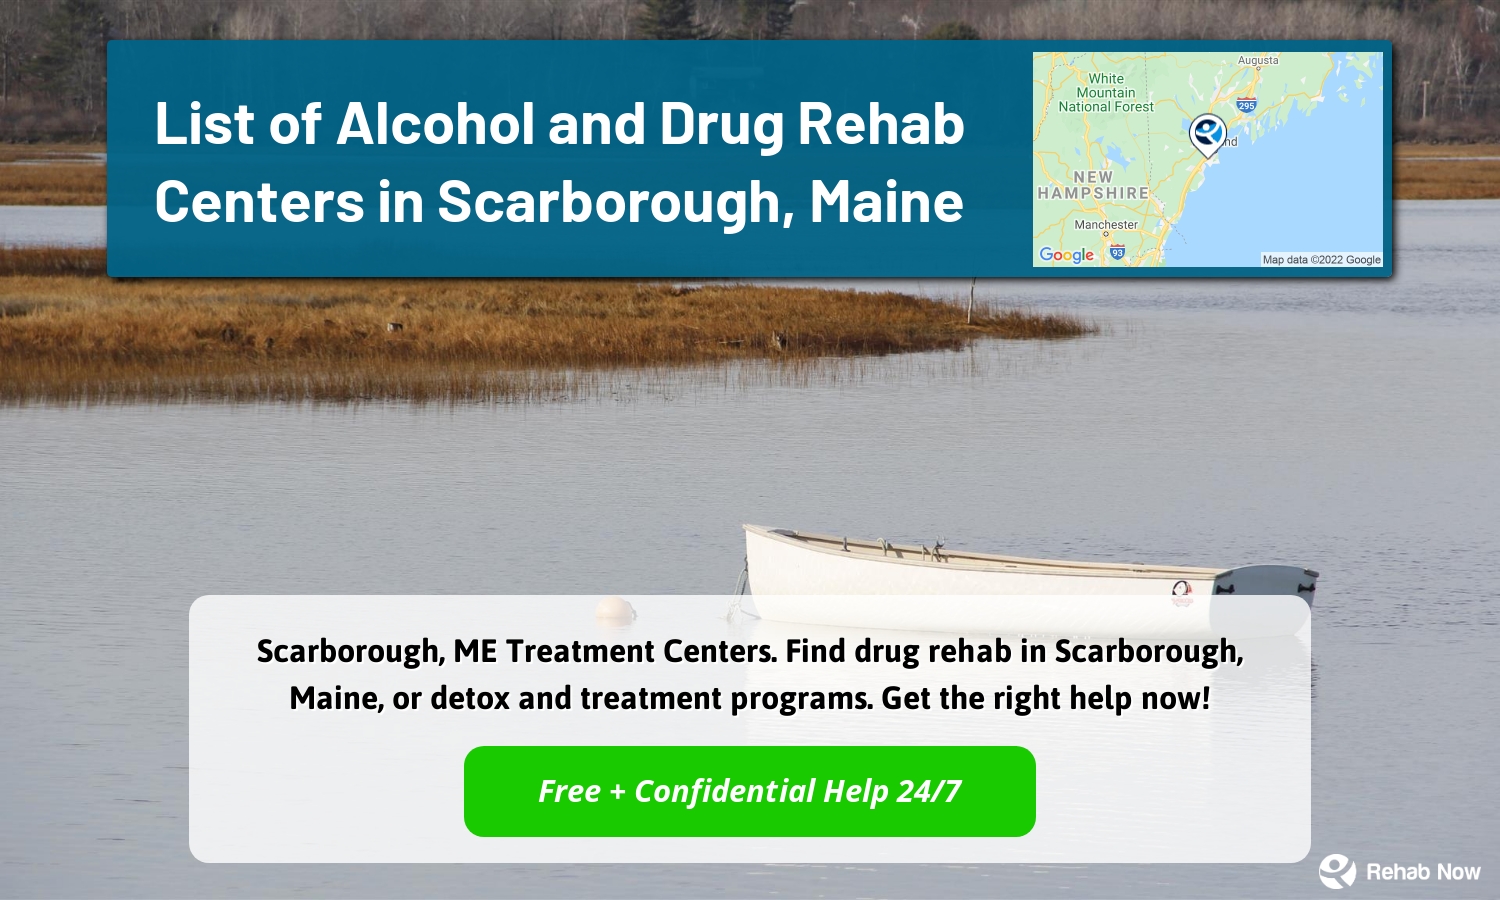 Scarborough, ME Treatment Centers. Find drug rehab in Scarborough, Maine, or detox and treatment programs. Get the right help now!